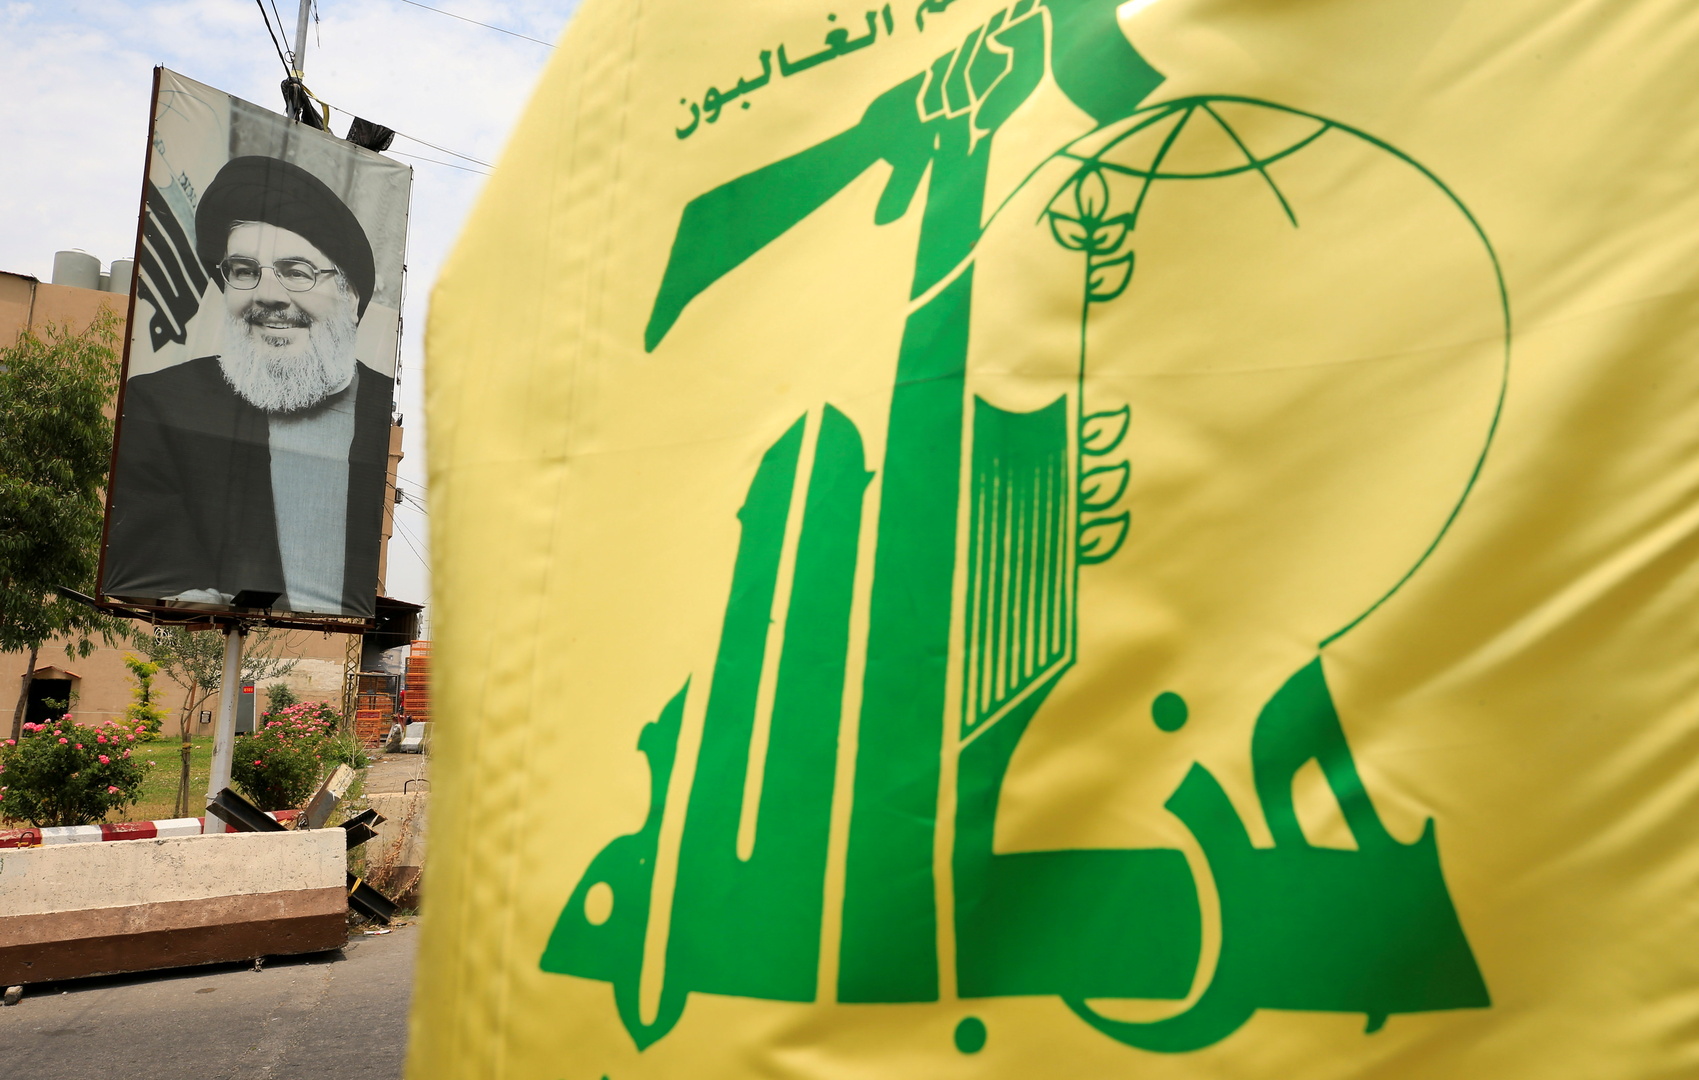 Hezbollah condemns US airstrikes in Iraq and Syria, warns of escalation